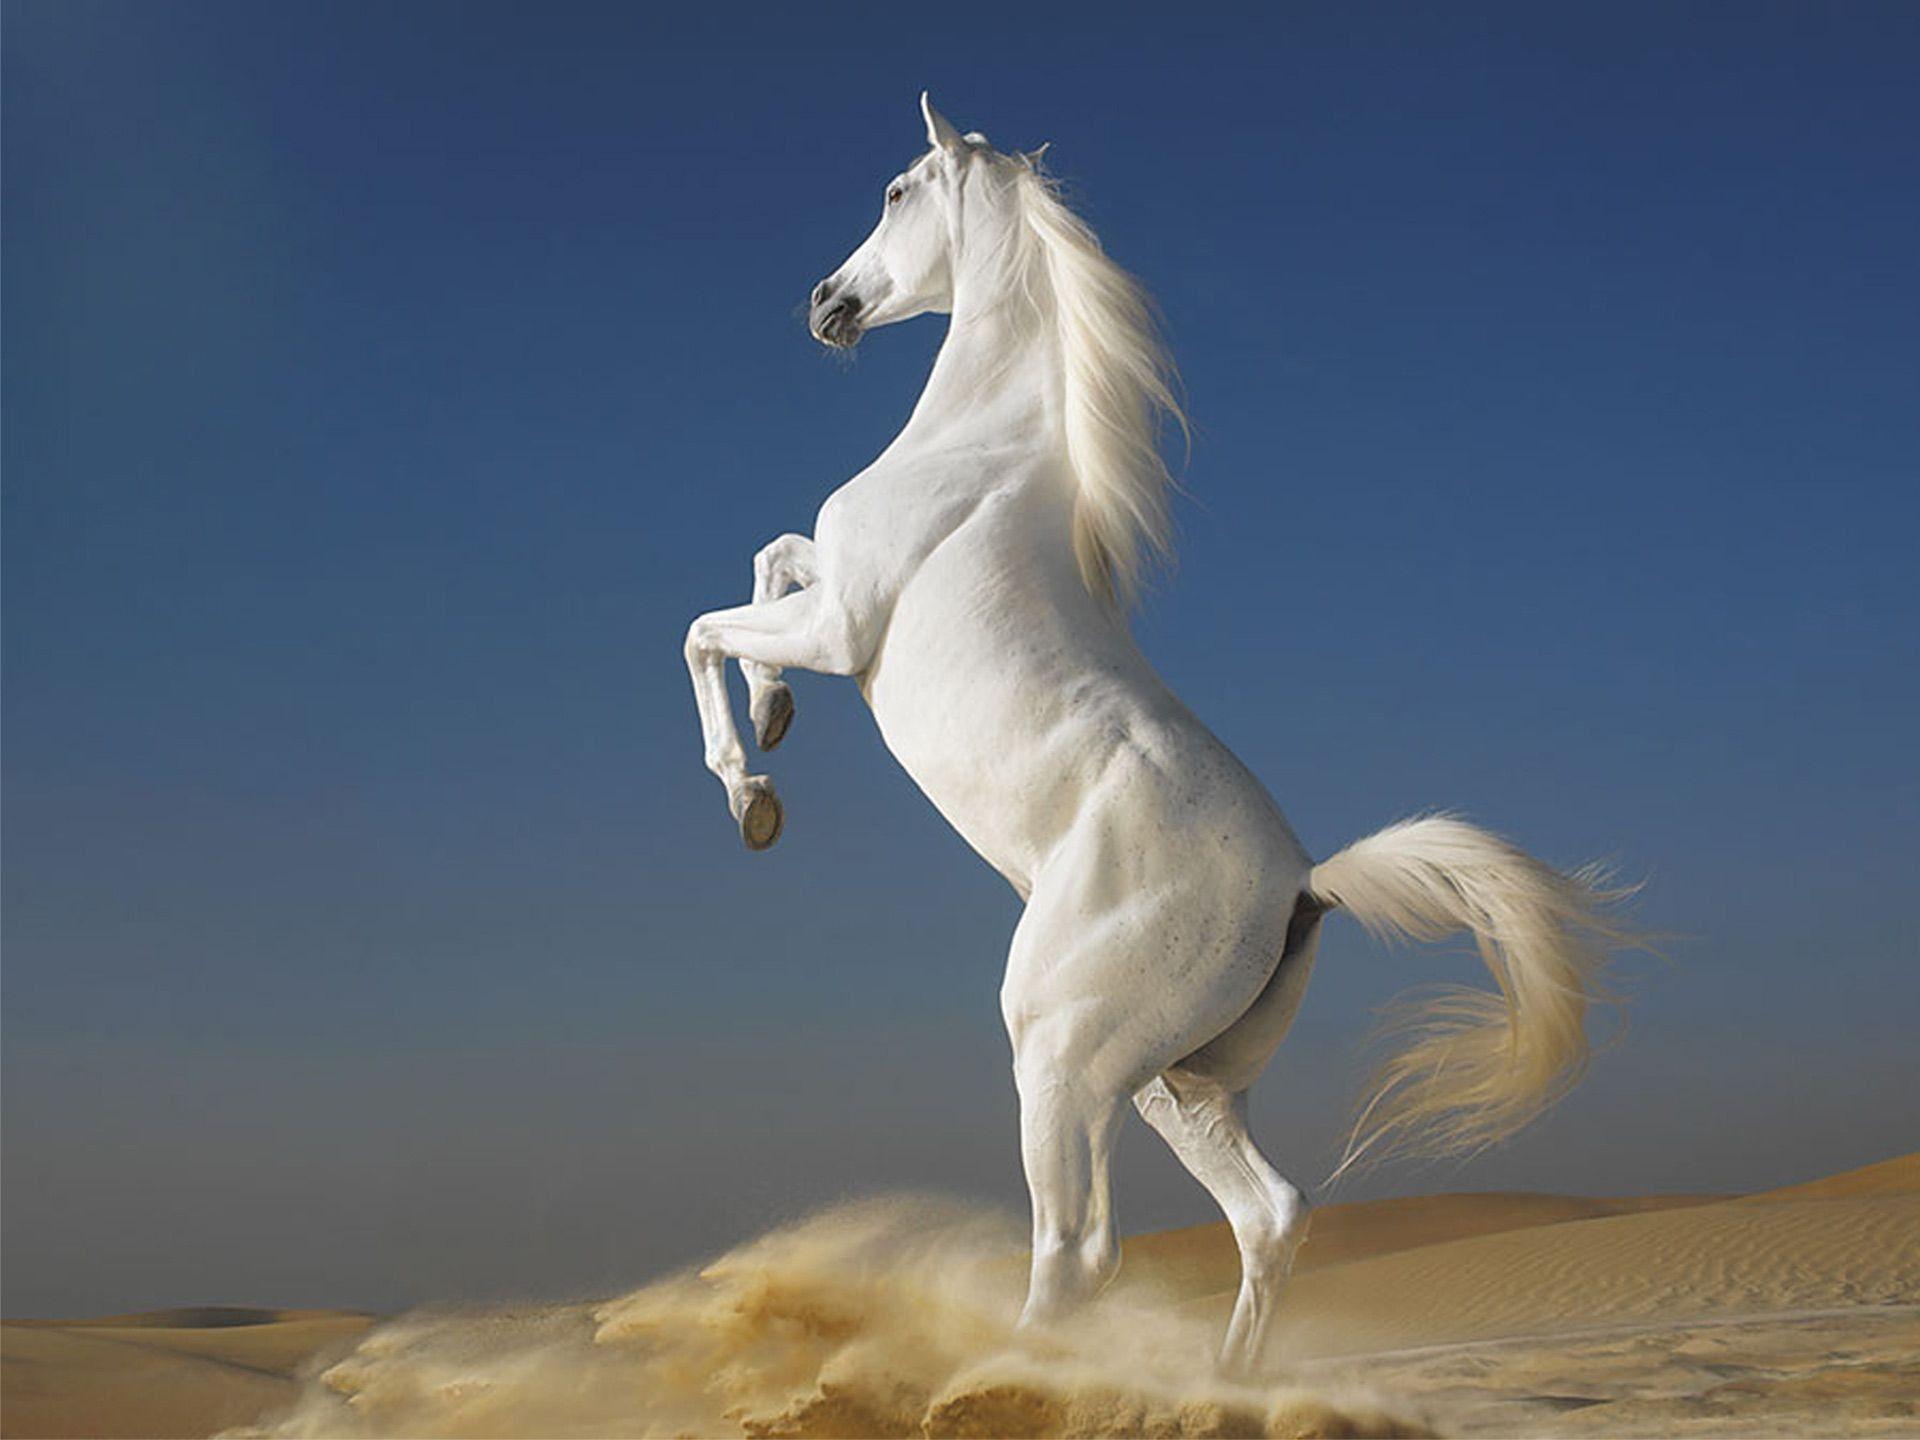 Horse backgroundDownload free stunning High Resolution